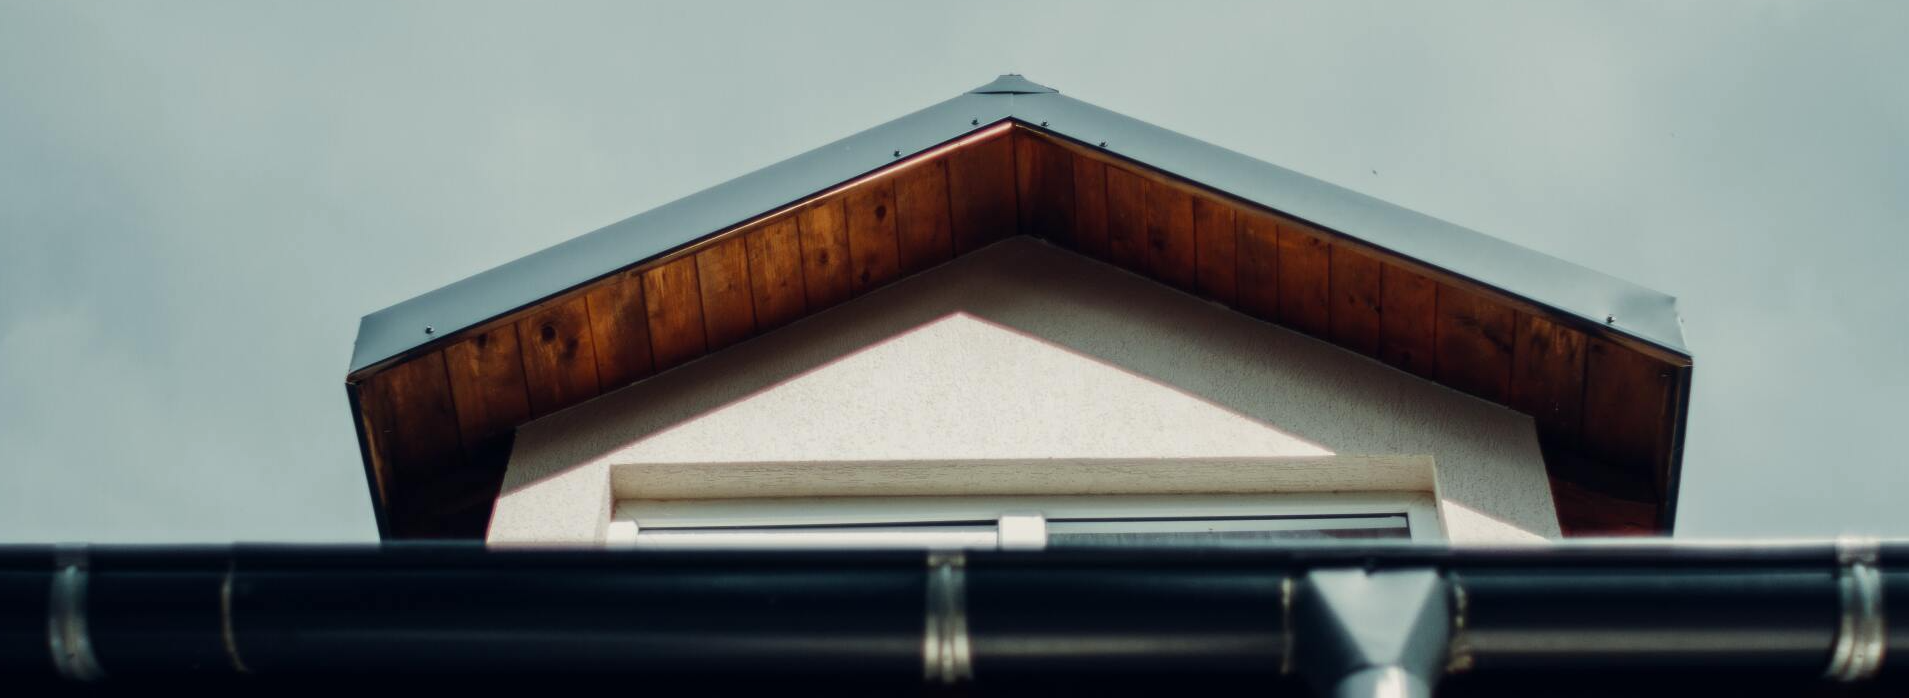 The roof of a house with a wooden roof and a black gutter.